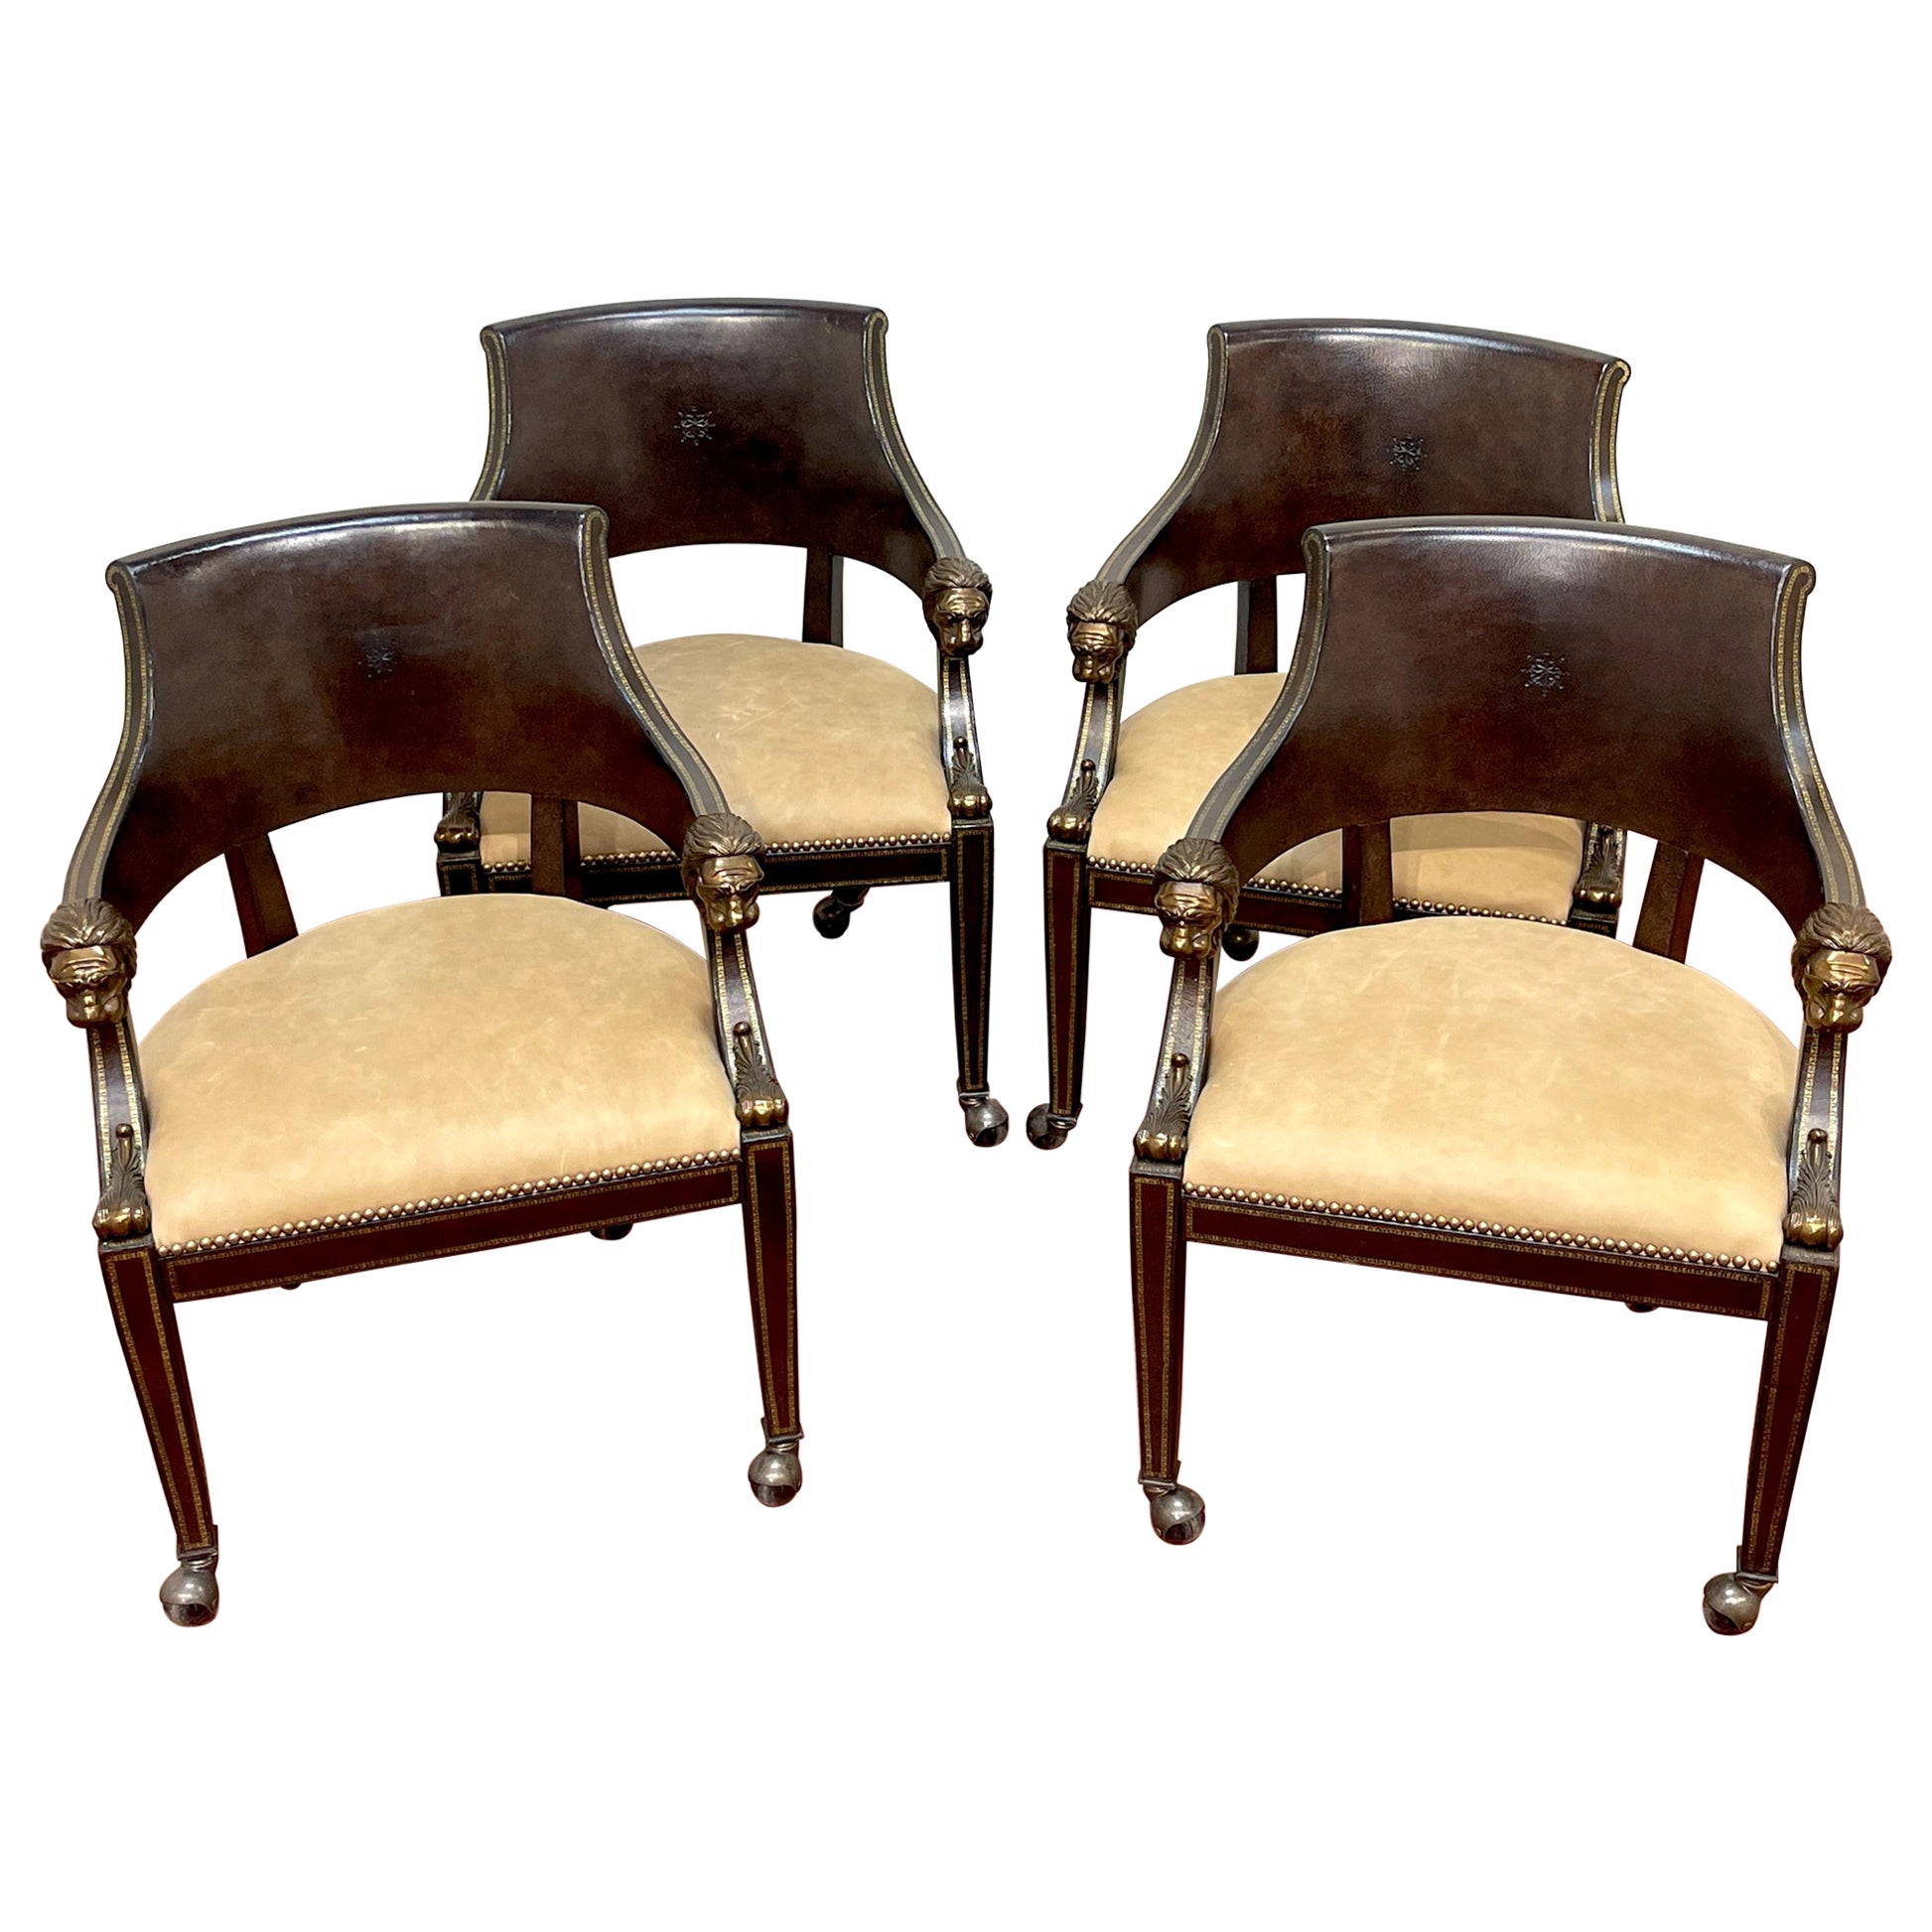 4 Gilt Leather Tooled Bronze Lion Head Armchairs on Castors, By Maitland-Smith For Sale